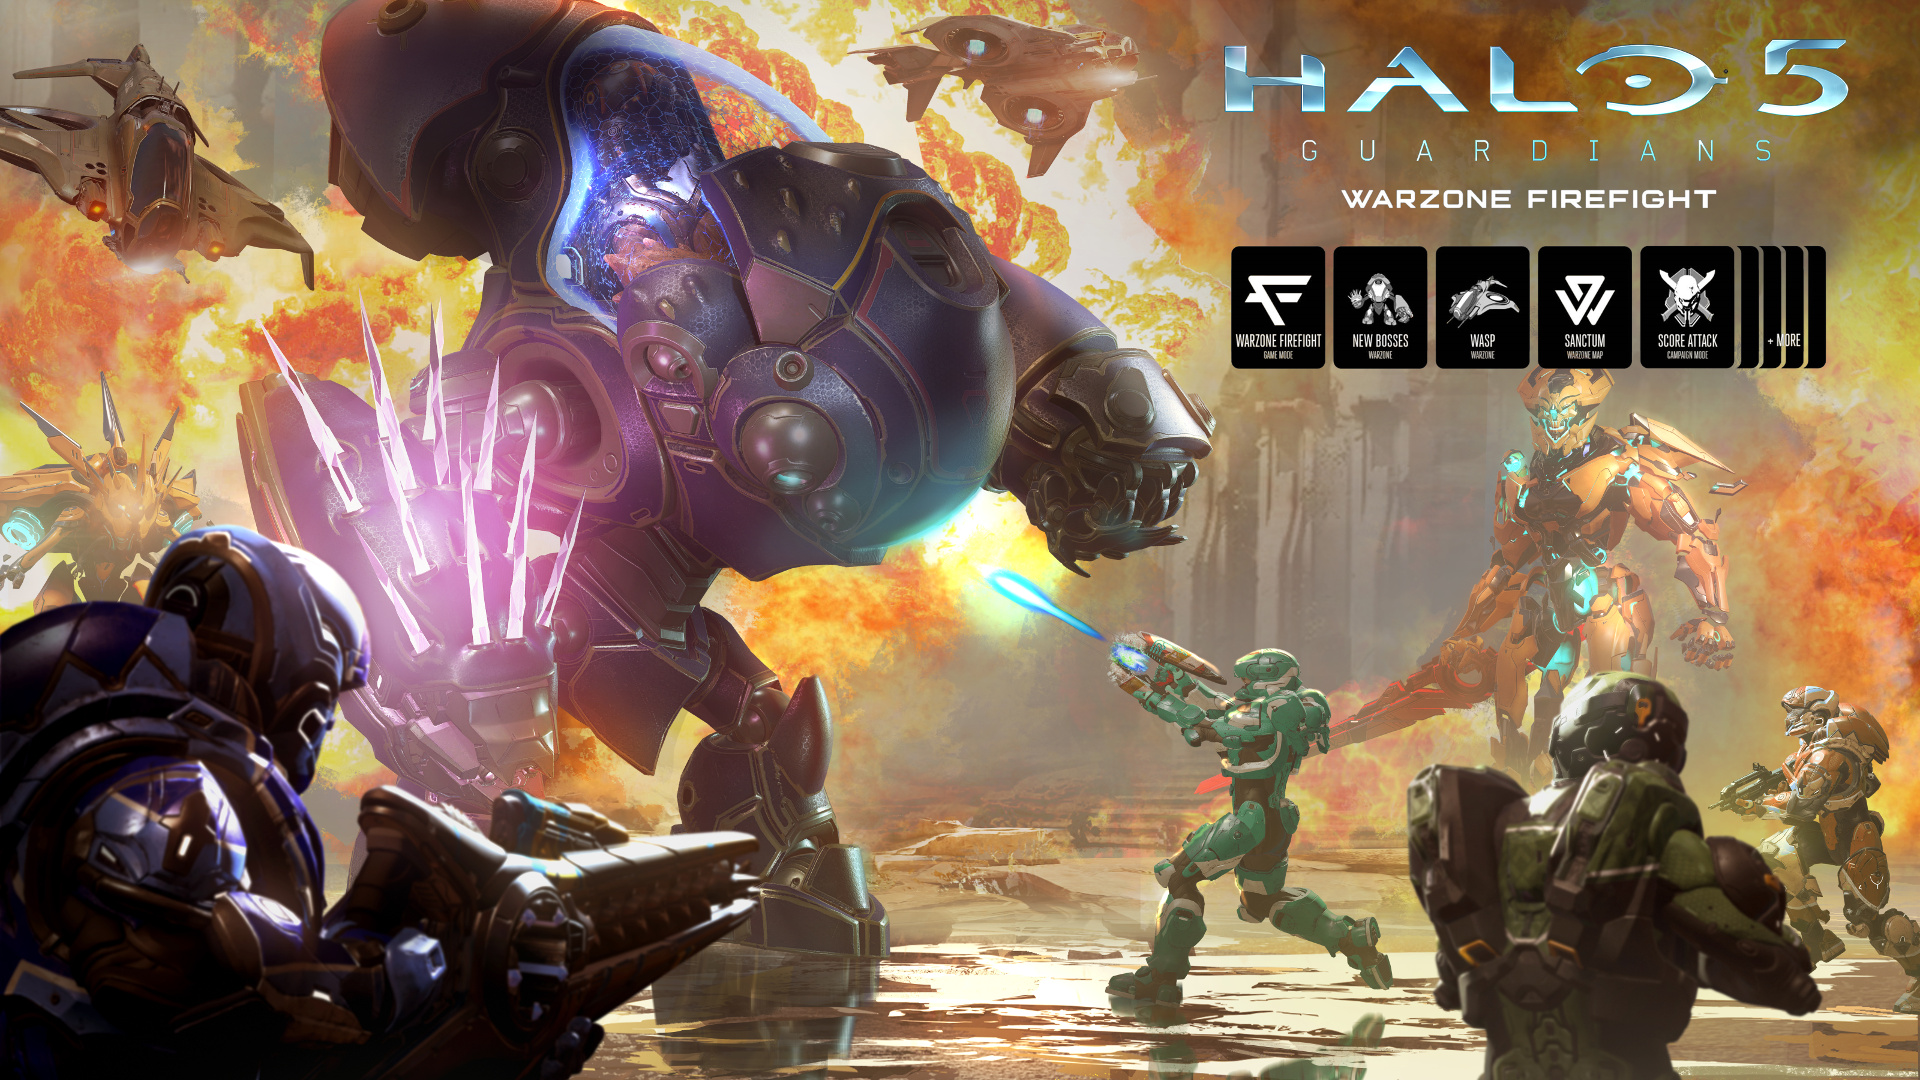 Halo-5-Guardians-Warzone-Firefight-Content-Release-VisID